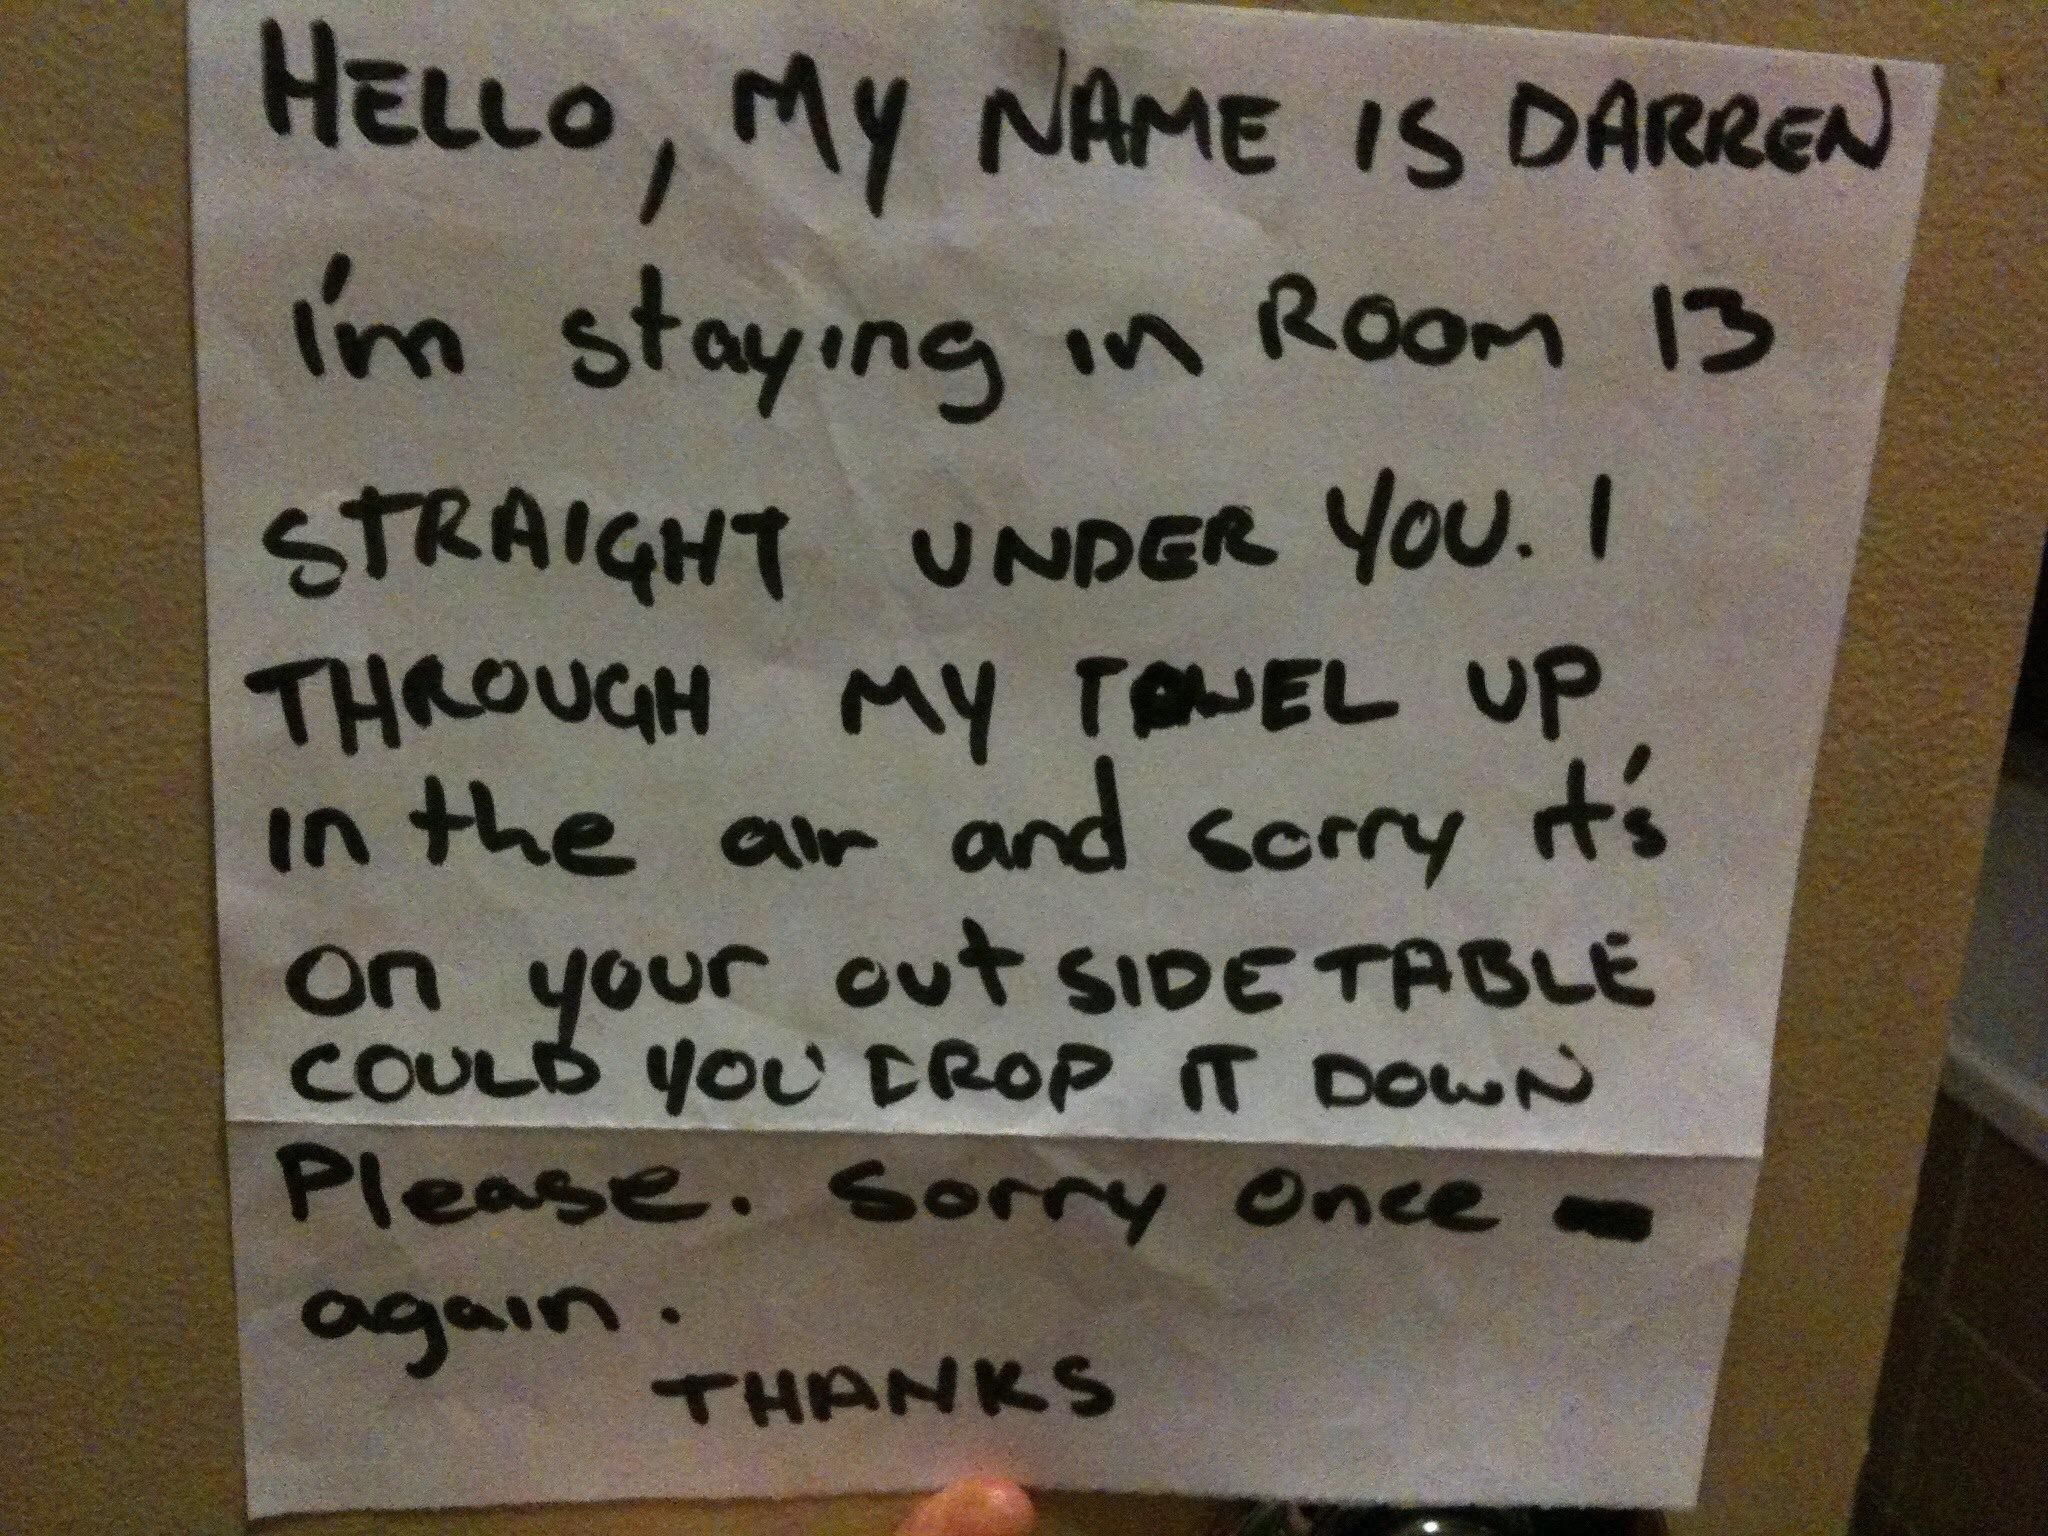 Found this masterpiece taped to my hotel door